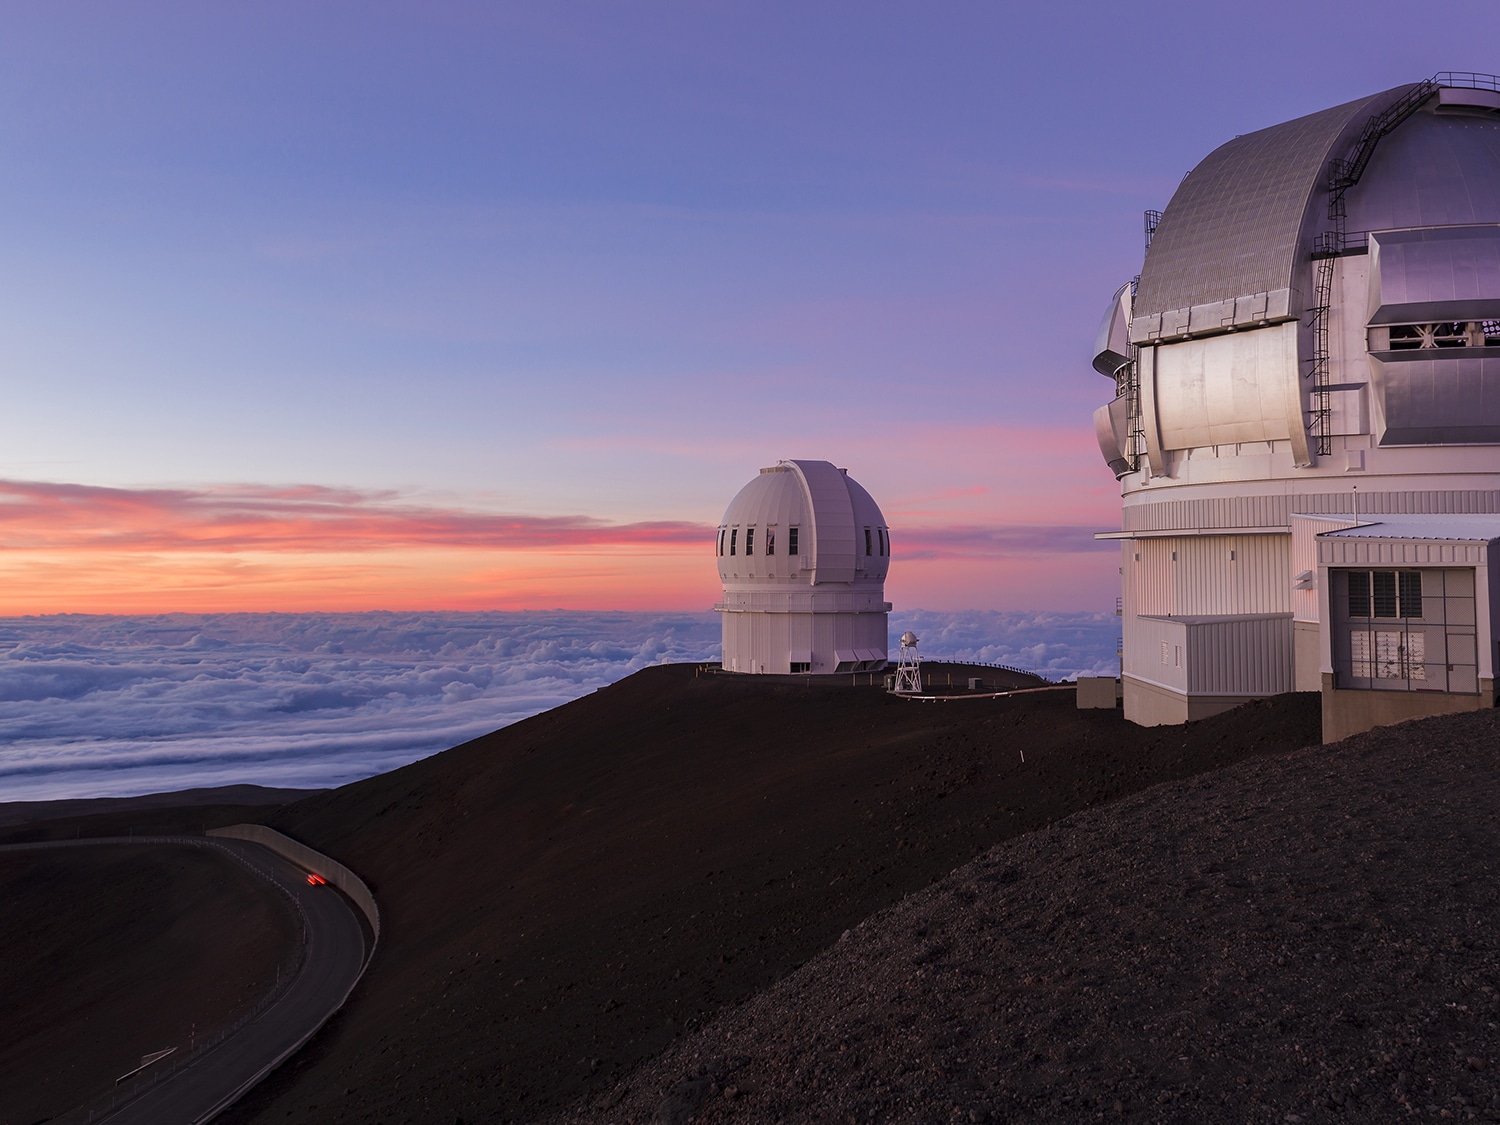 Best Things to Do in Big Island Hawaii - Sunset from Mauna Kea